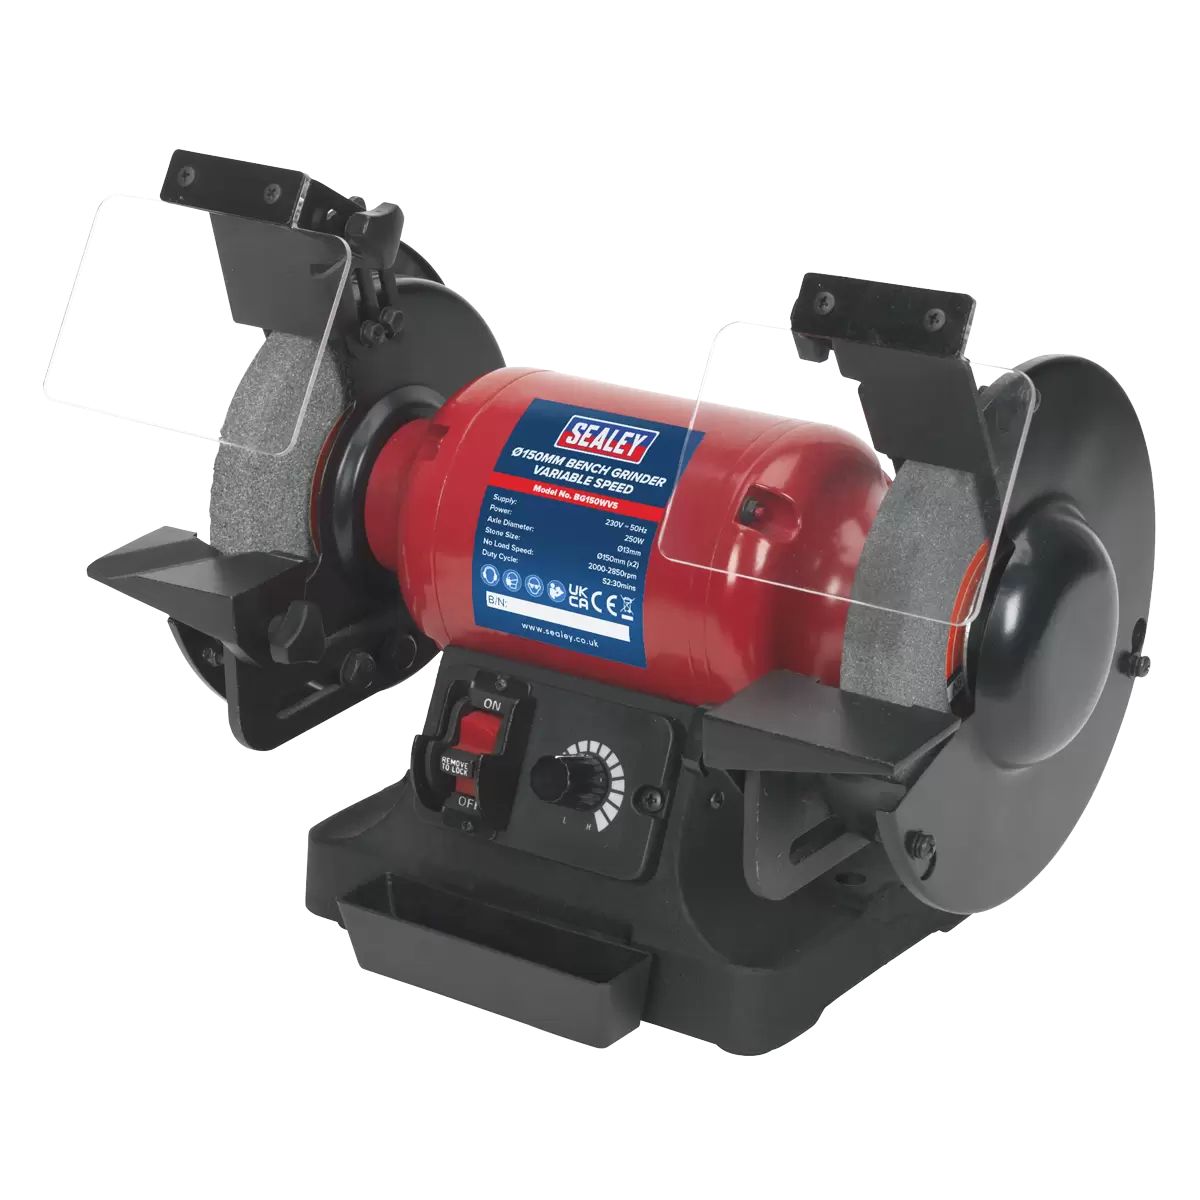 Sealey BG150WVS Bench Grinder 150mm Variable Speed